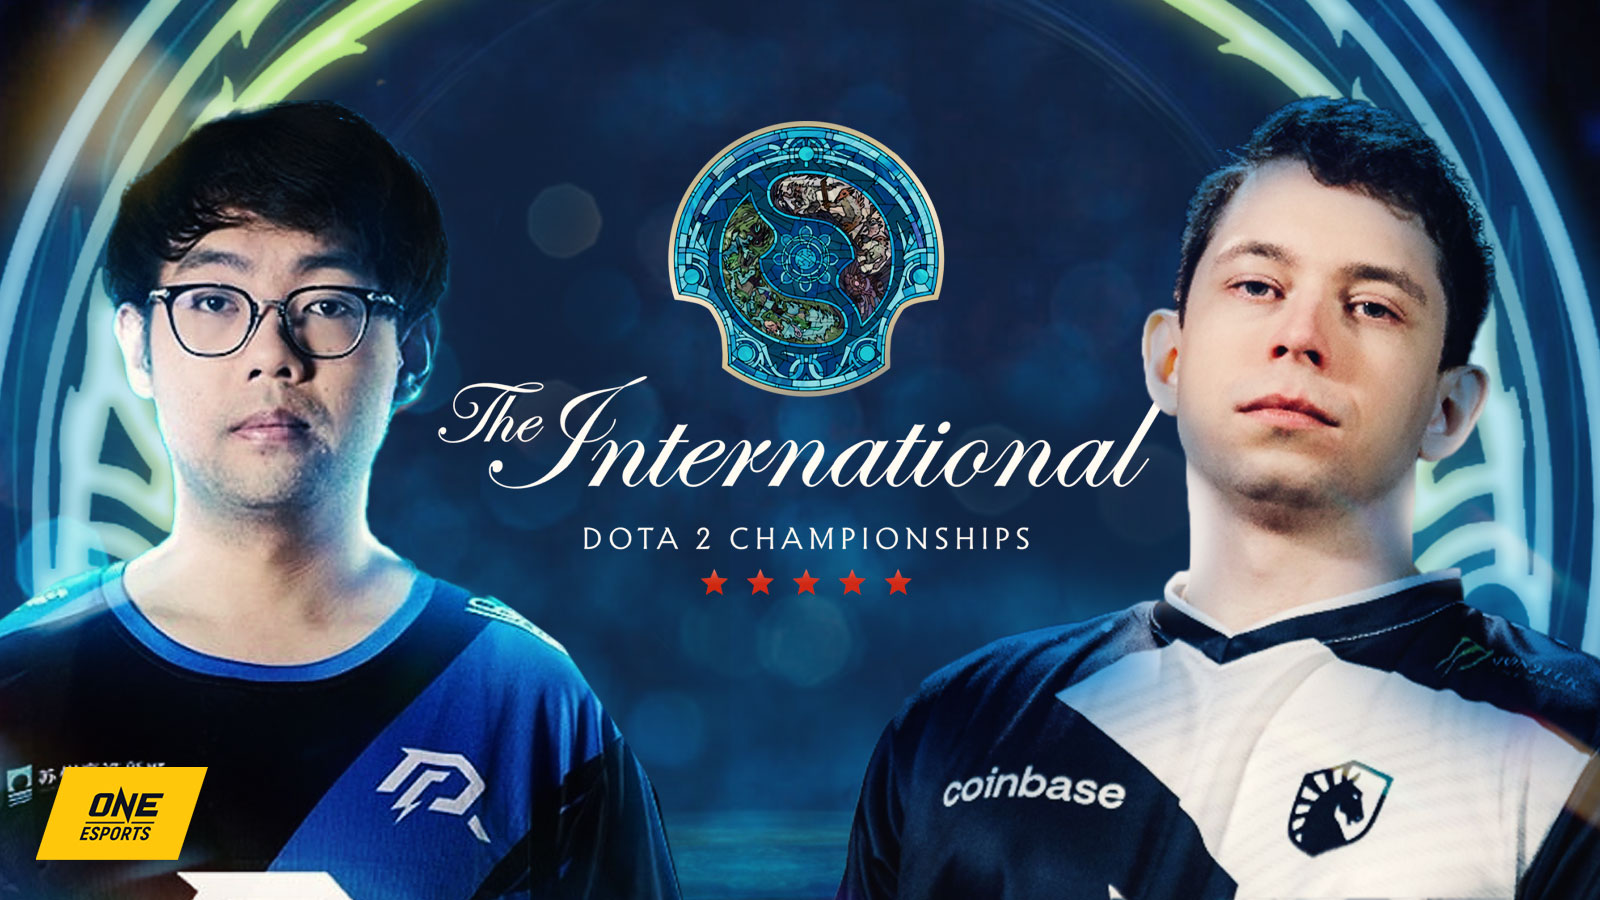 One last day of the TI 2023 SEA Qualifiers to determine who goes